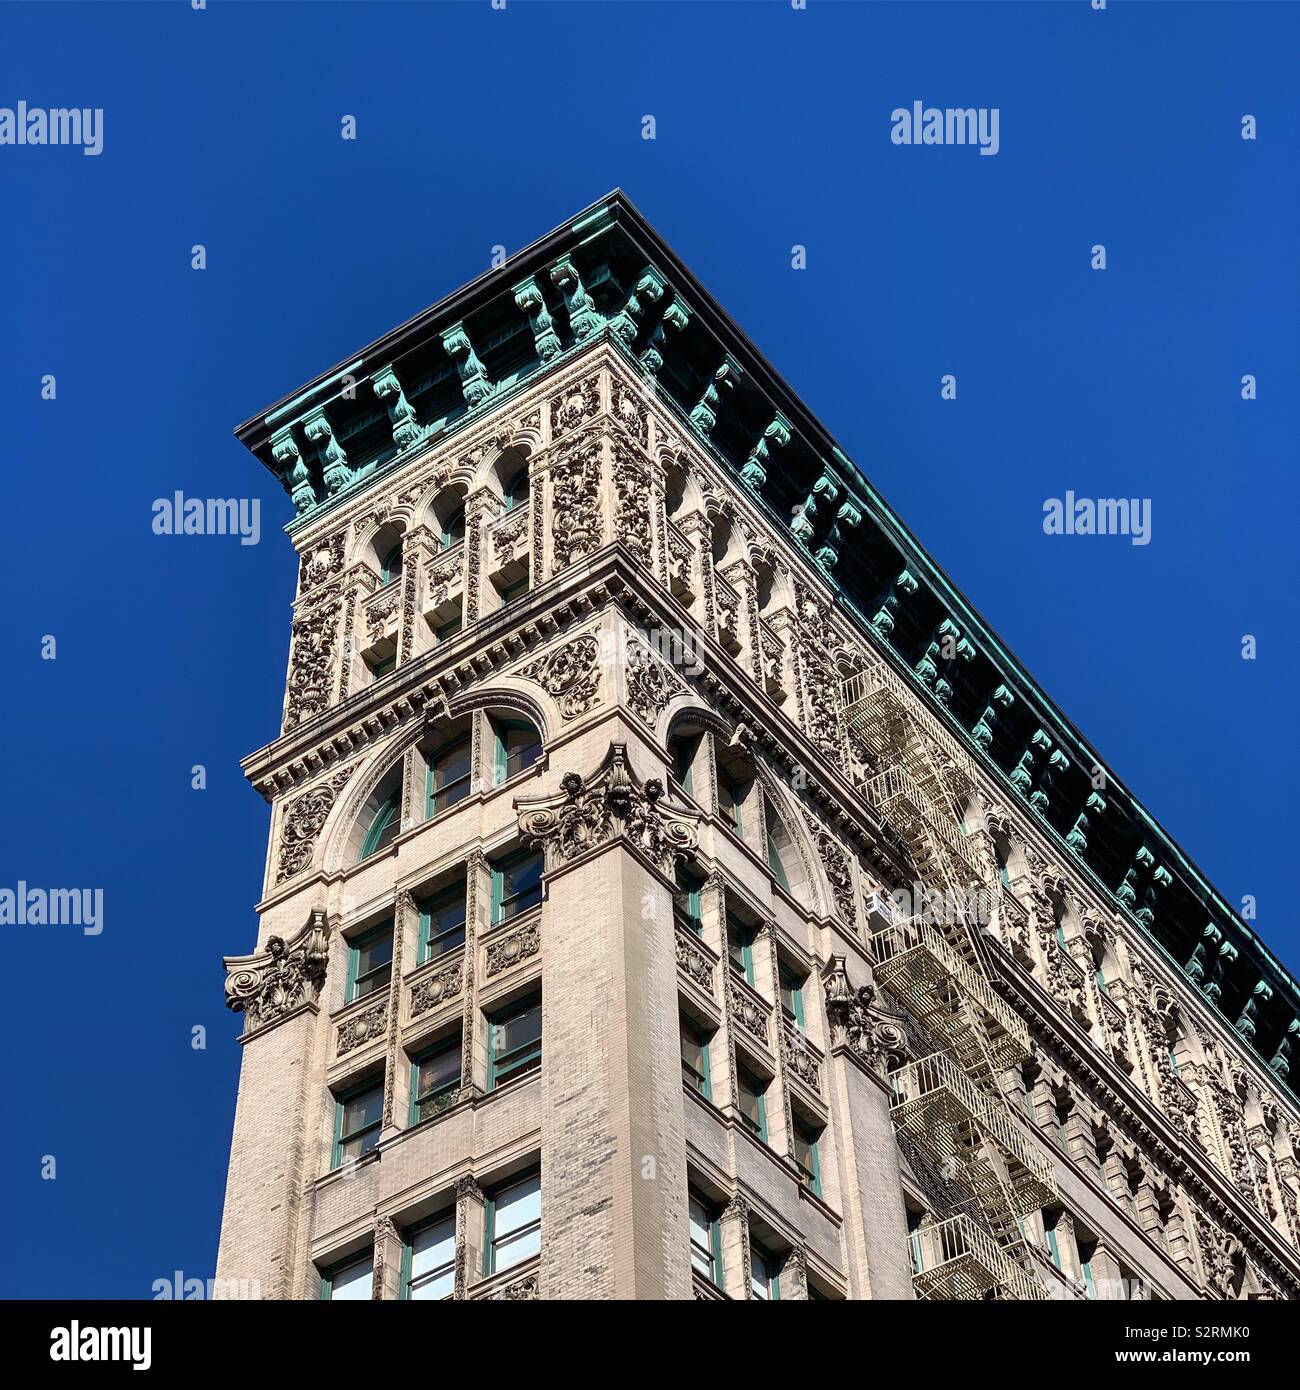 A building in SoHo, New York City, New York, United States Stock Photo